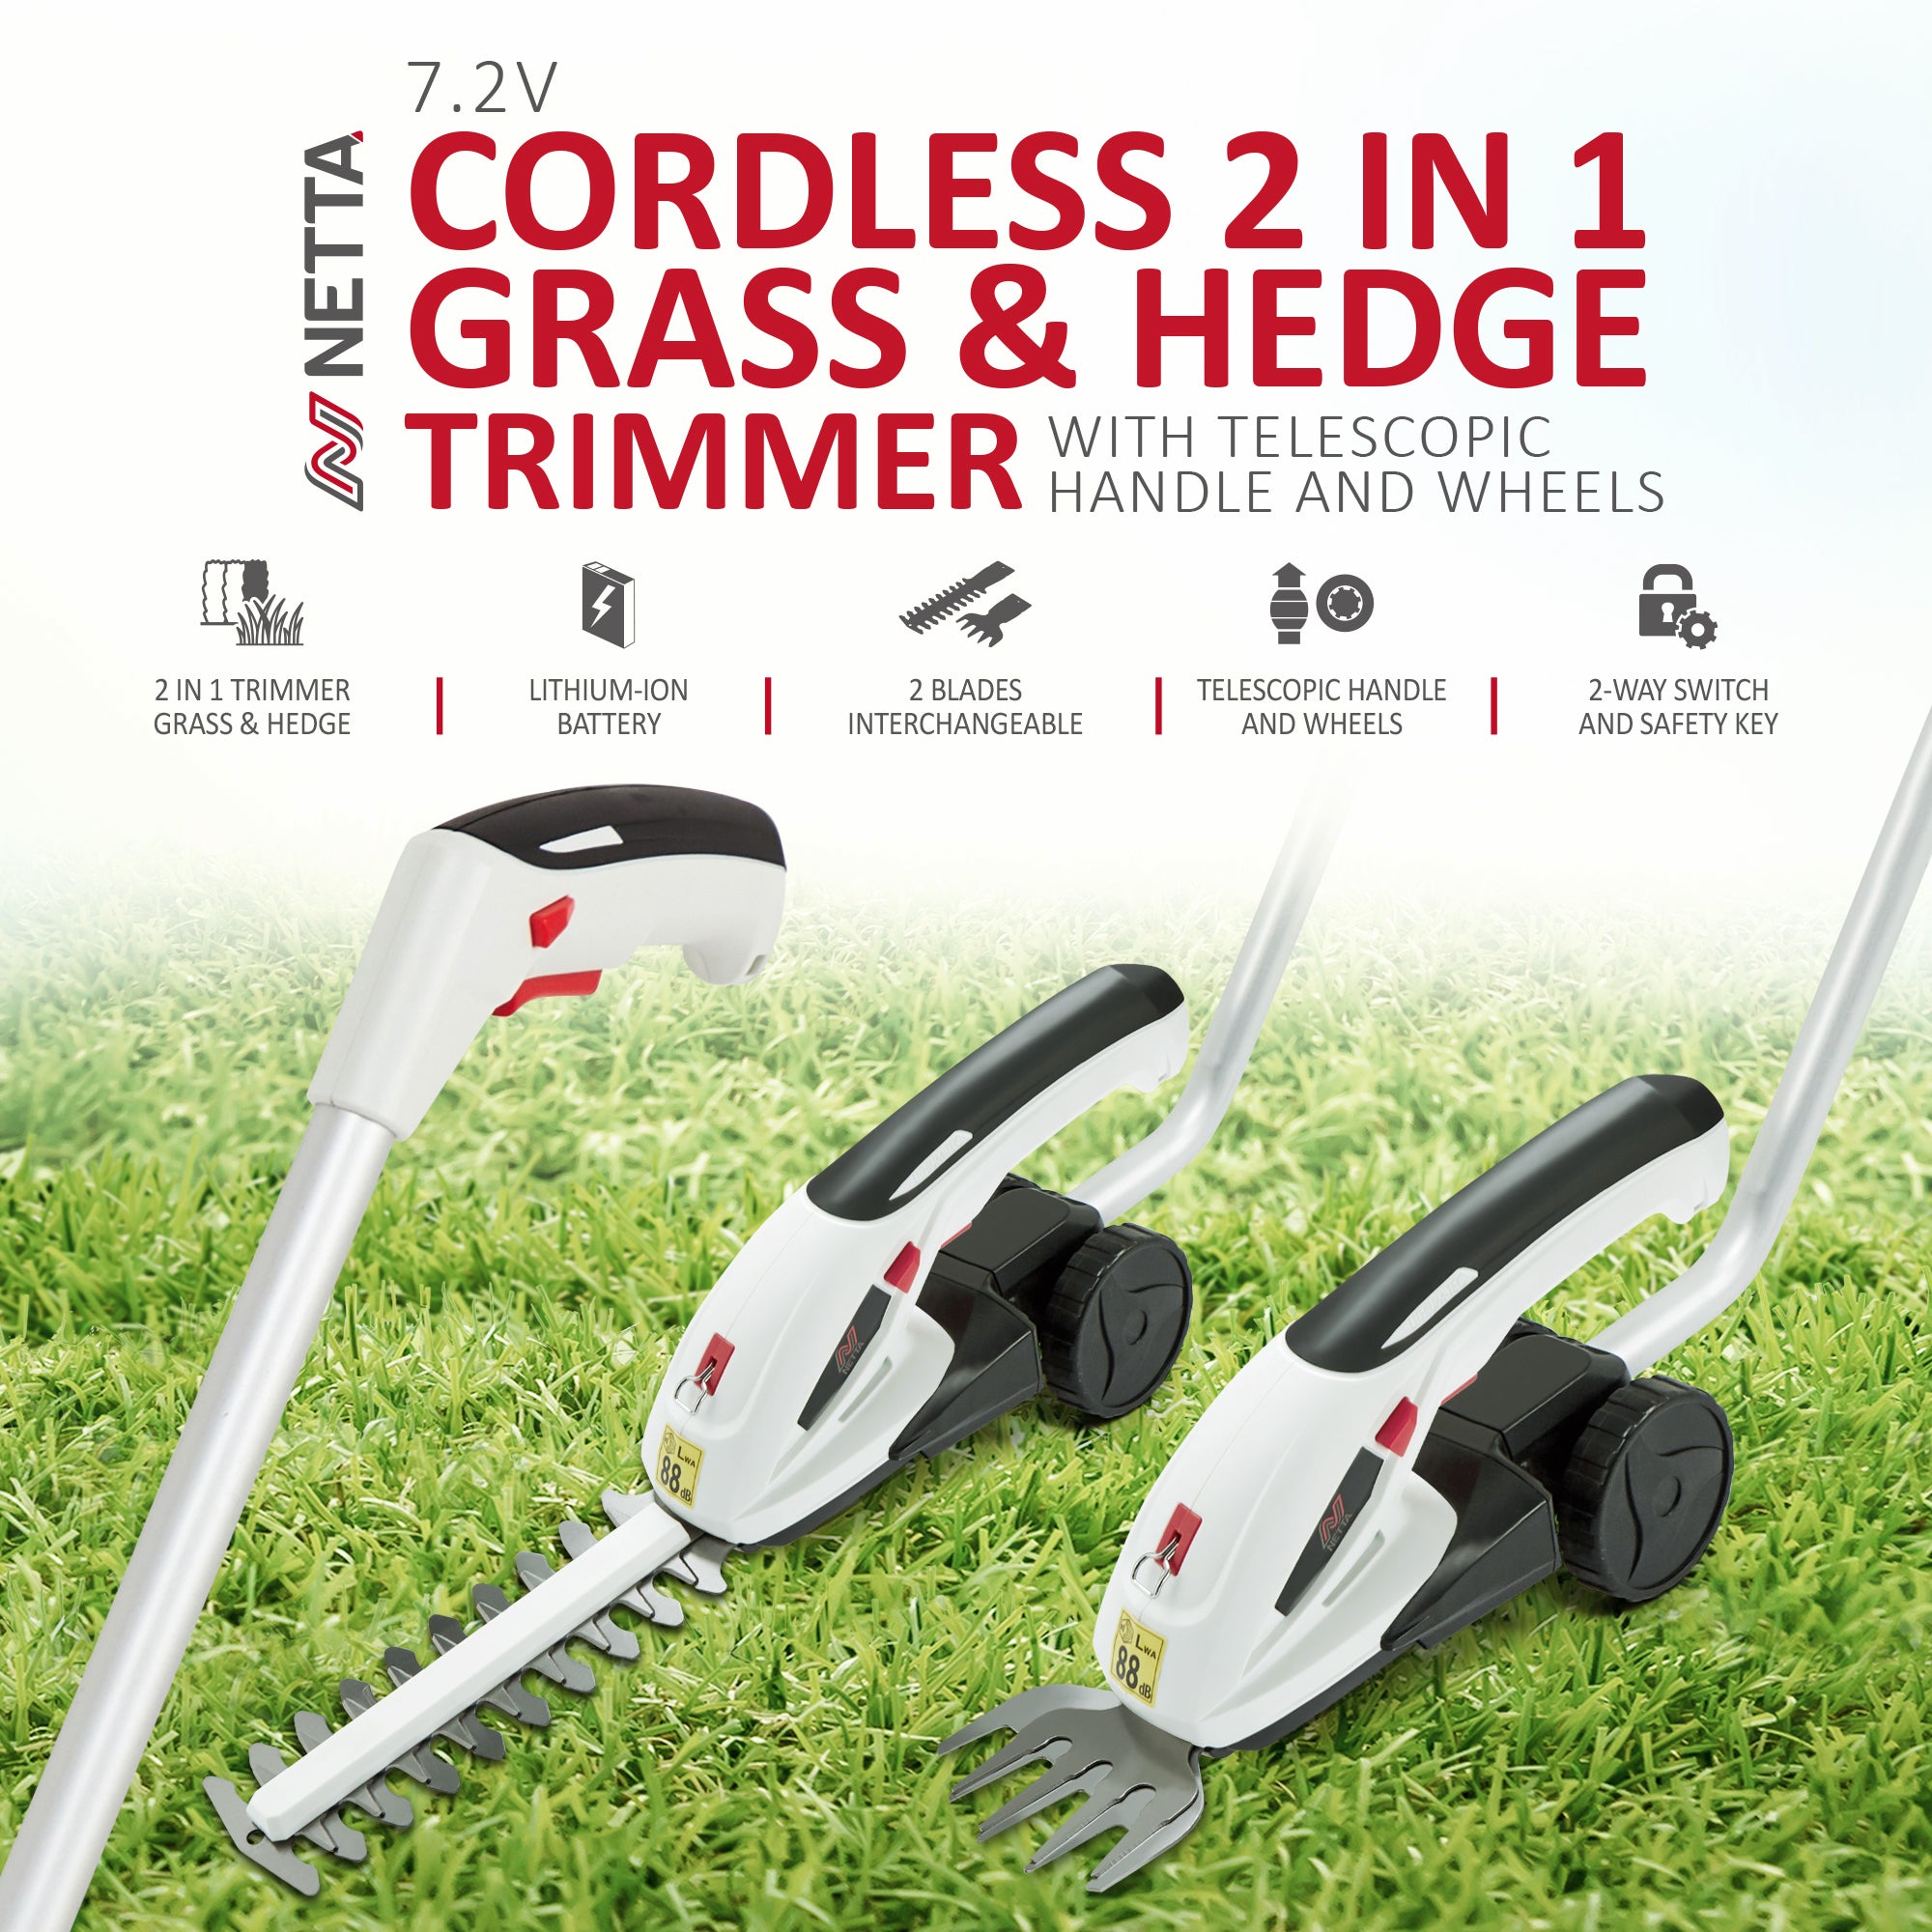 NETTA 7.2V Cordless 2 in 1 Grass and Hedge Trimmer with Telescopic Pole Handle